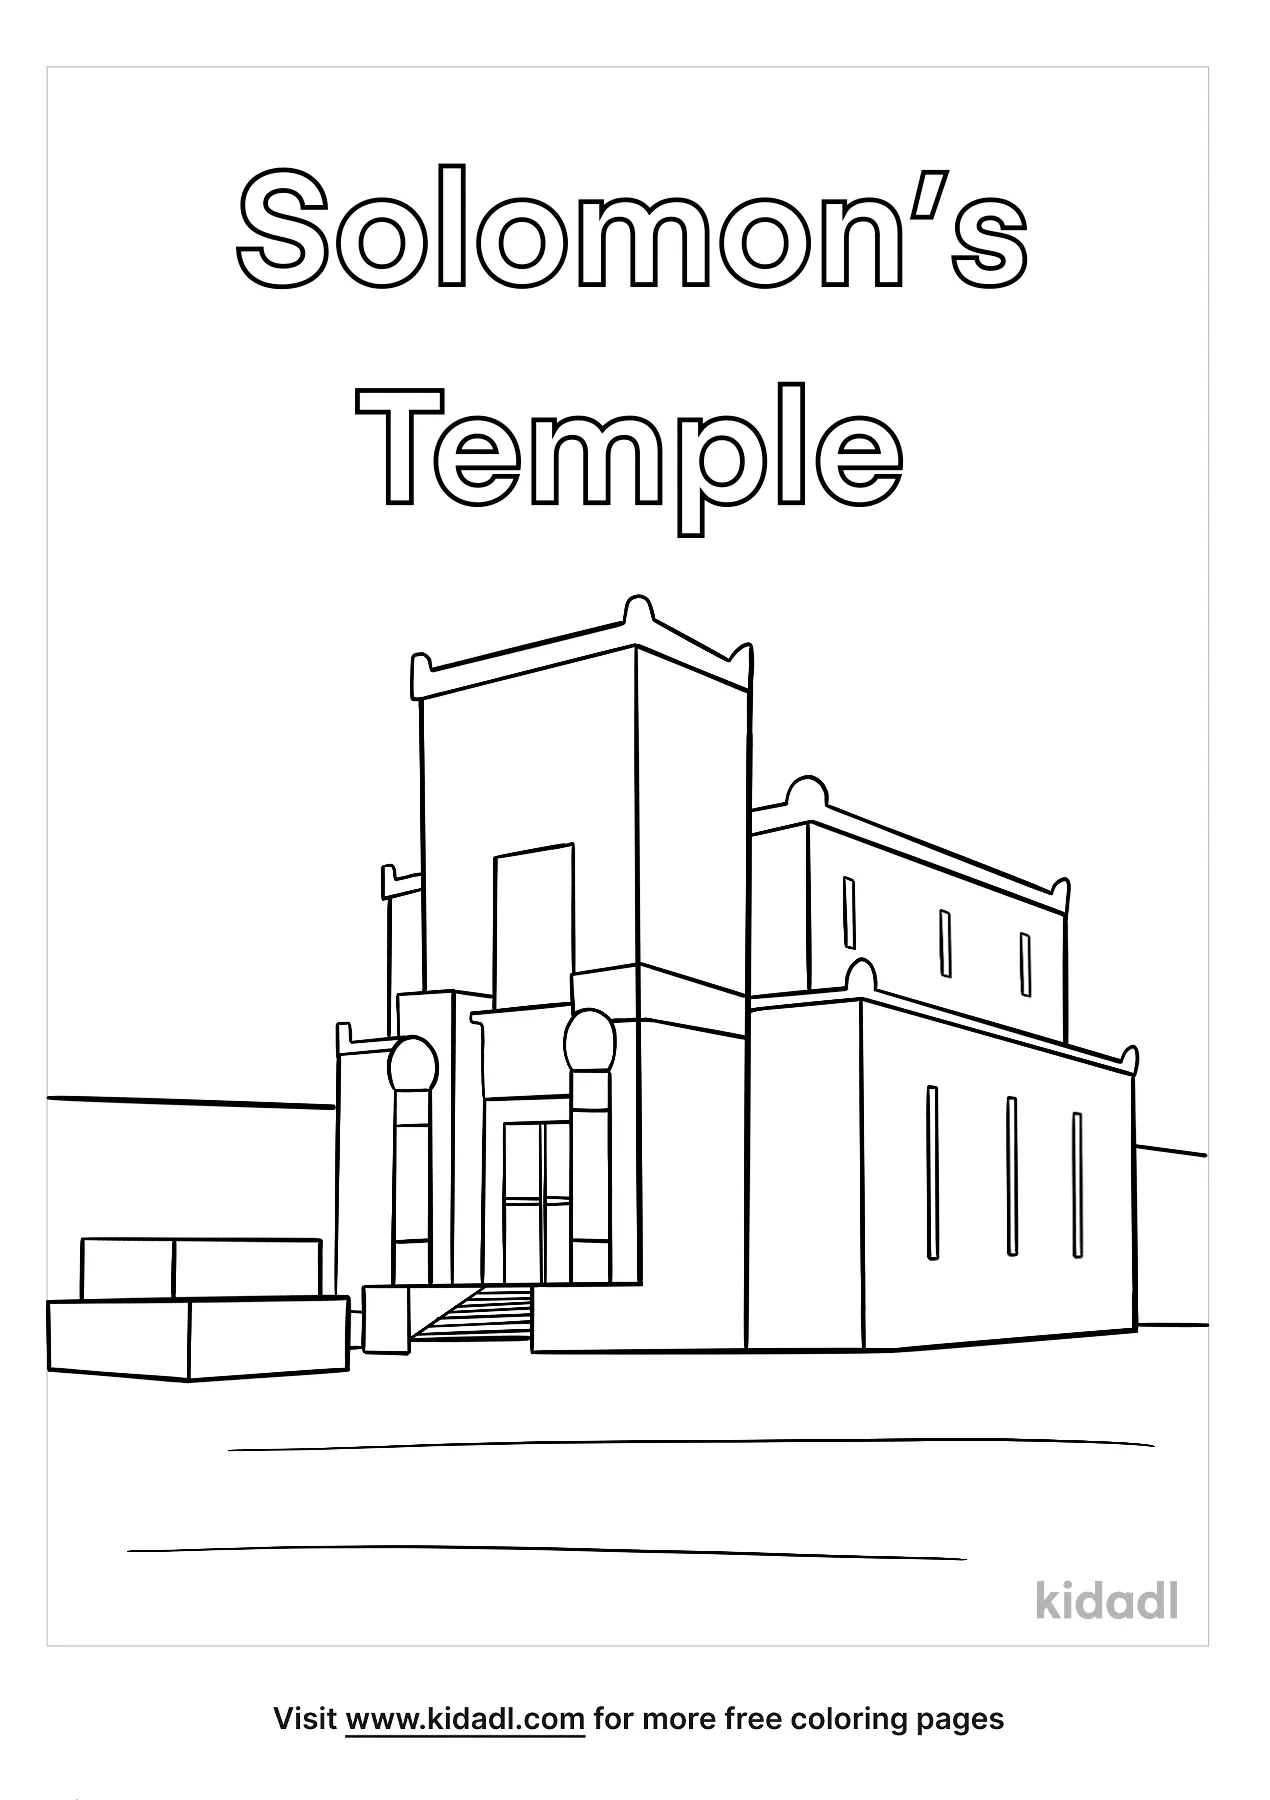 Free solomons temple coloring page coloring page printables